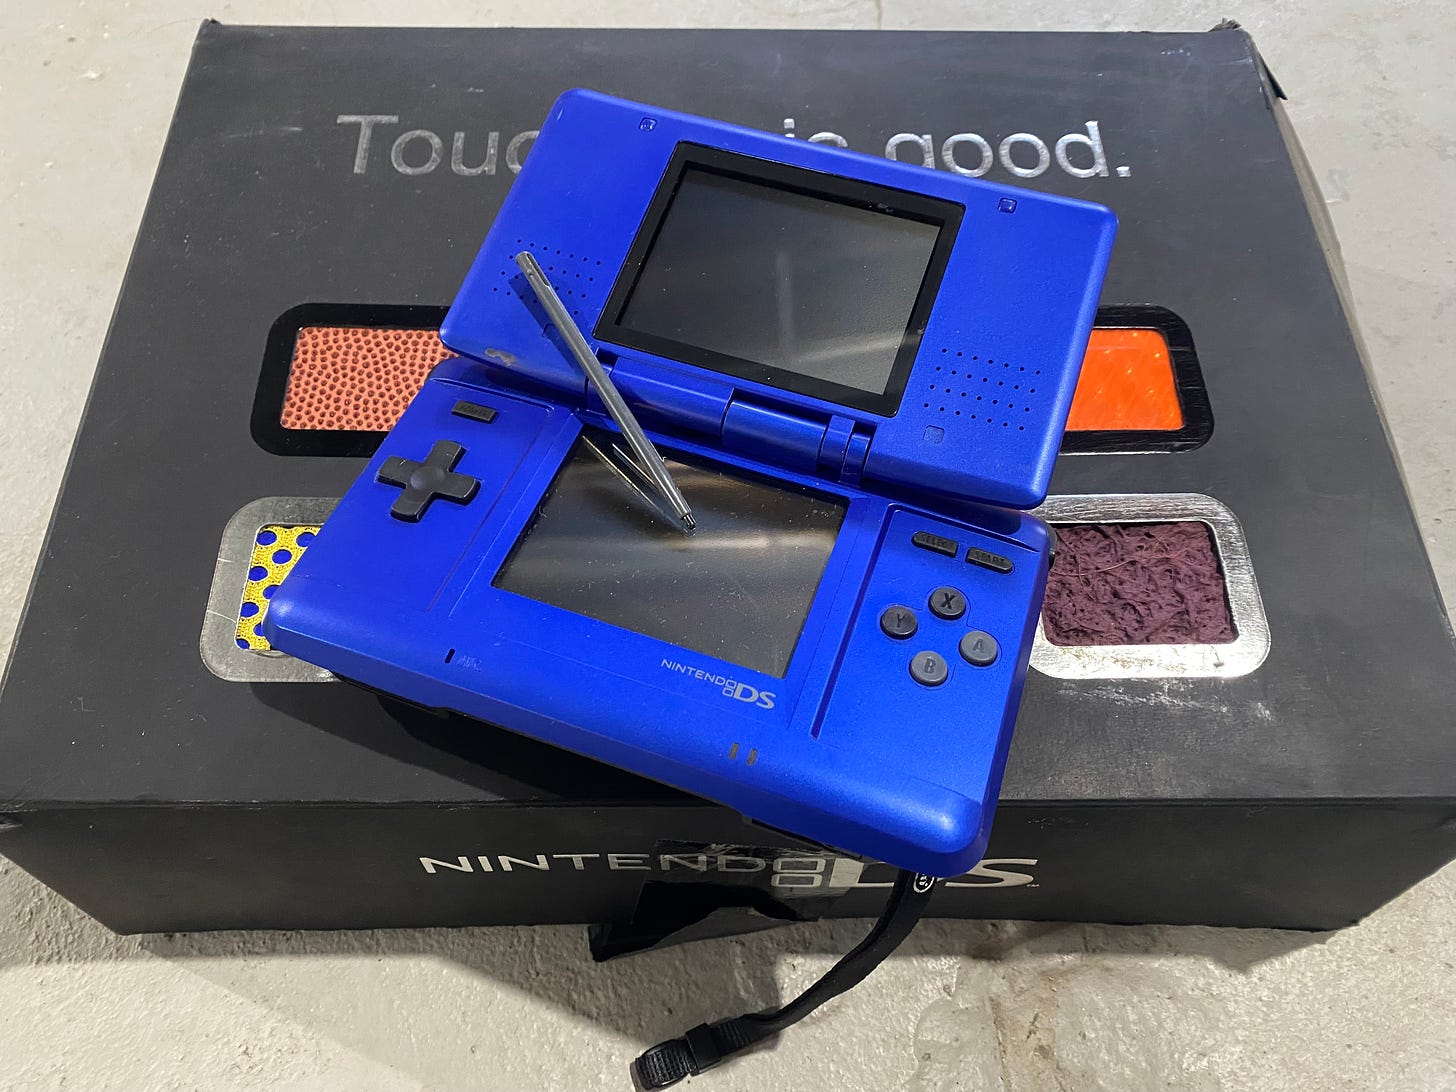 Photo of a blue Nintendo DS on top of a black box that bears the phrase "Touching is Good" and includes some dsquare panels of different rough textures.